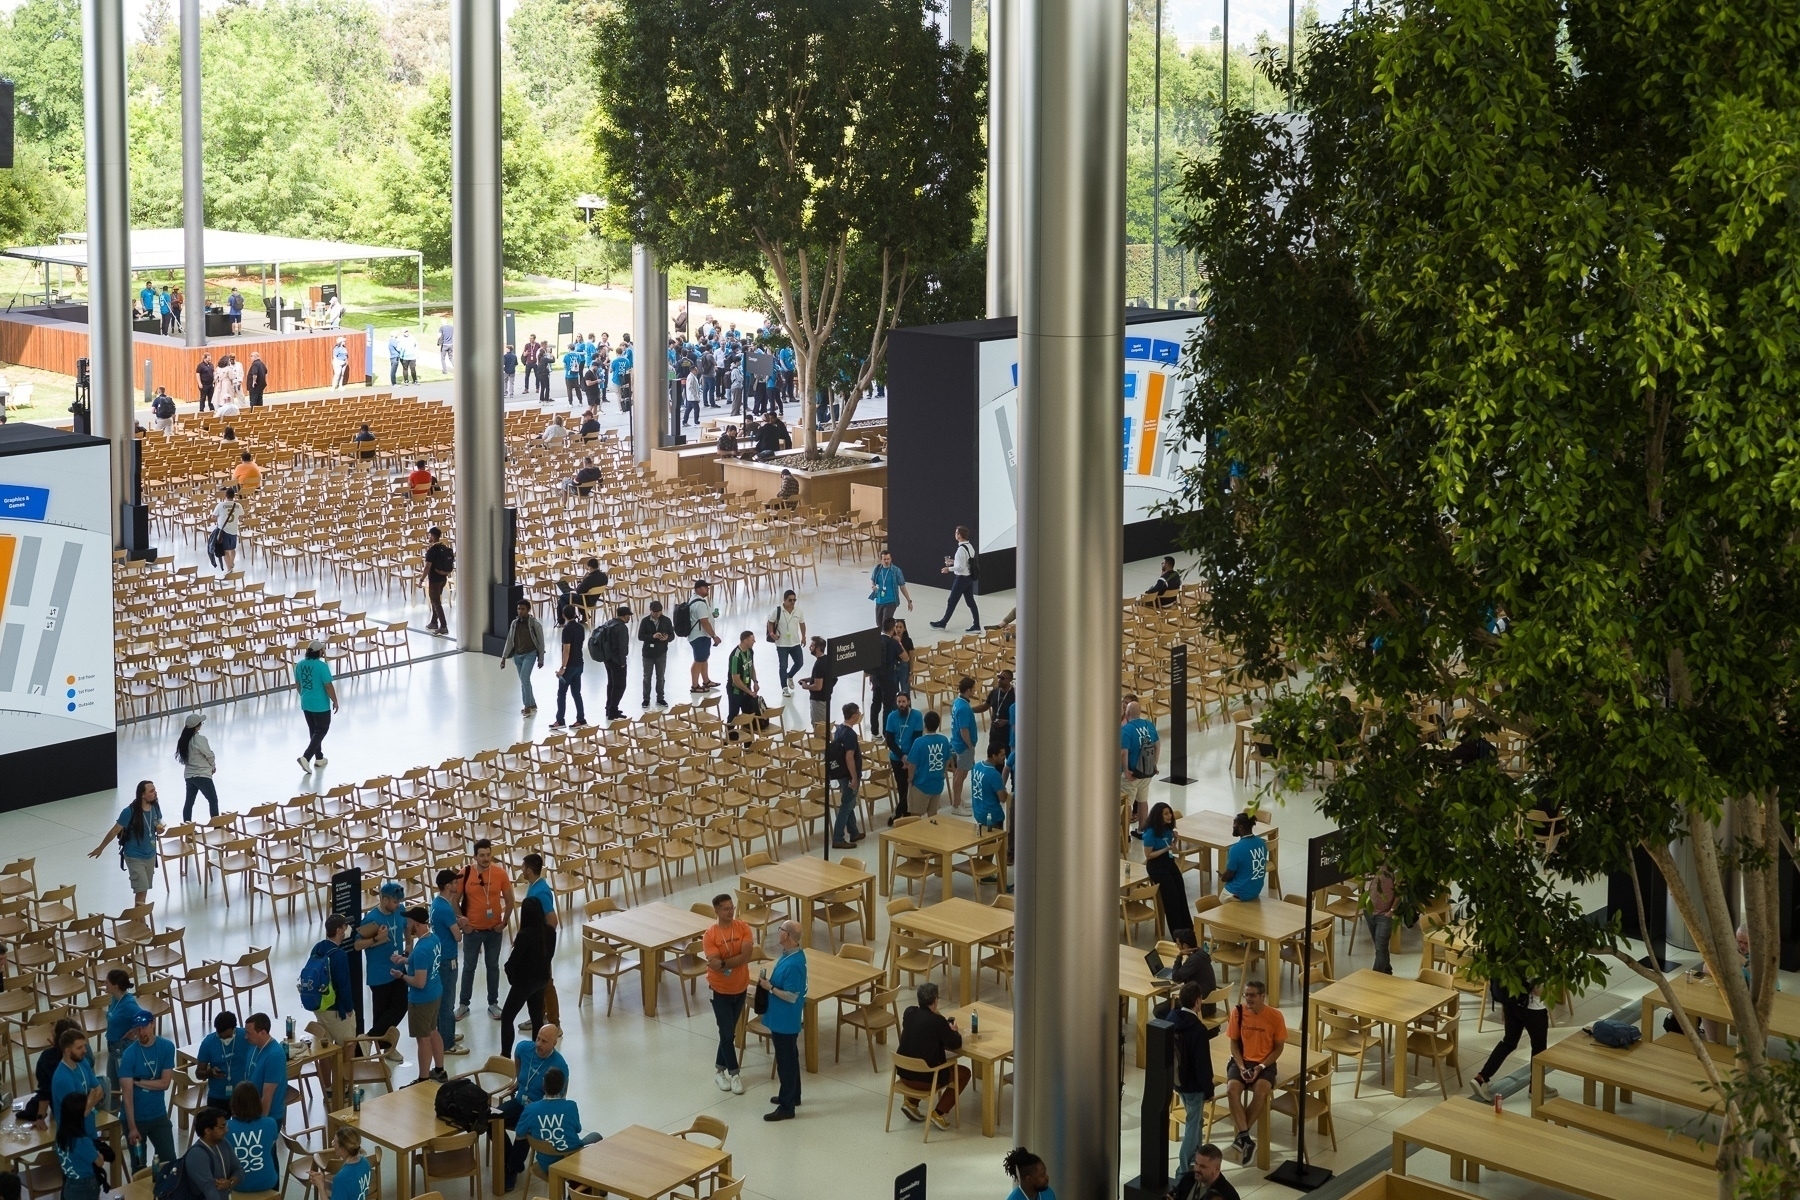 An interior view of a conference area as seen from above. There are a number of chairs, some people, a few style pillars and trees.